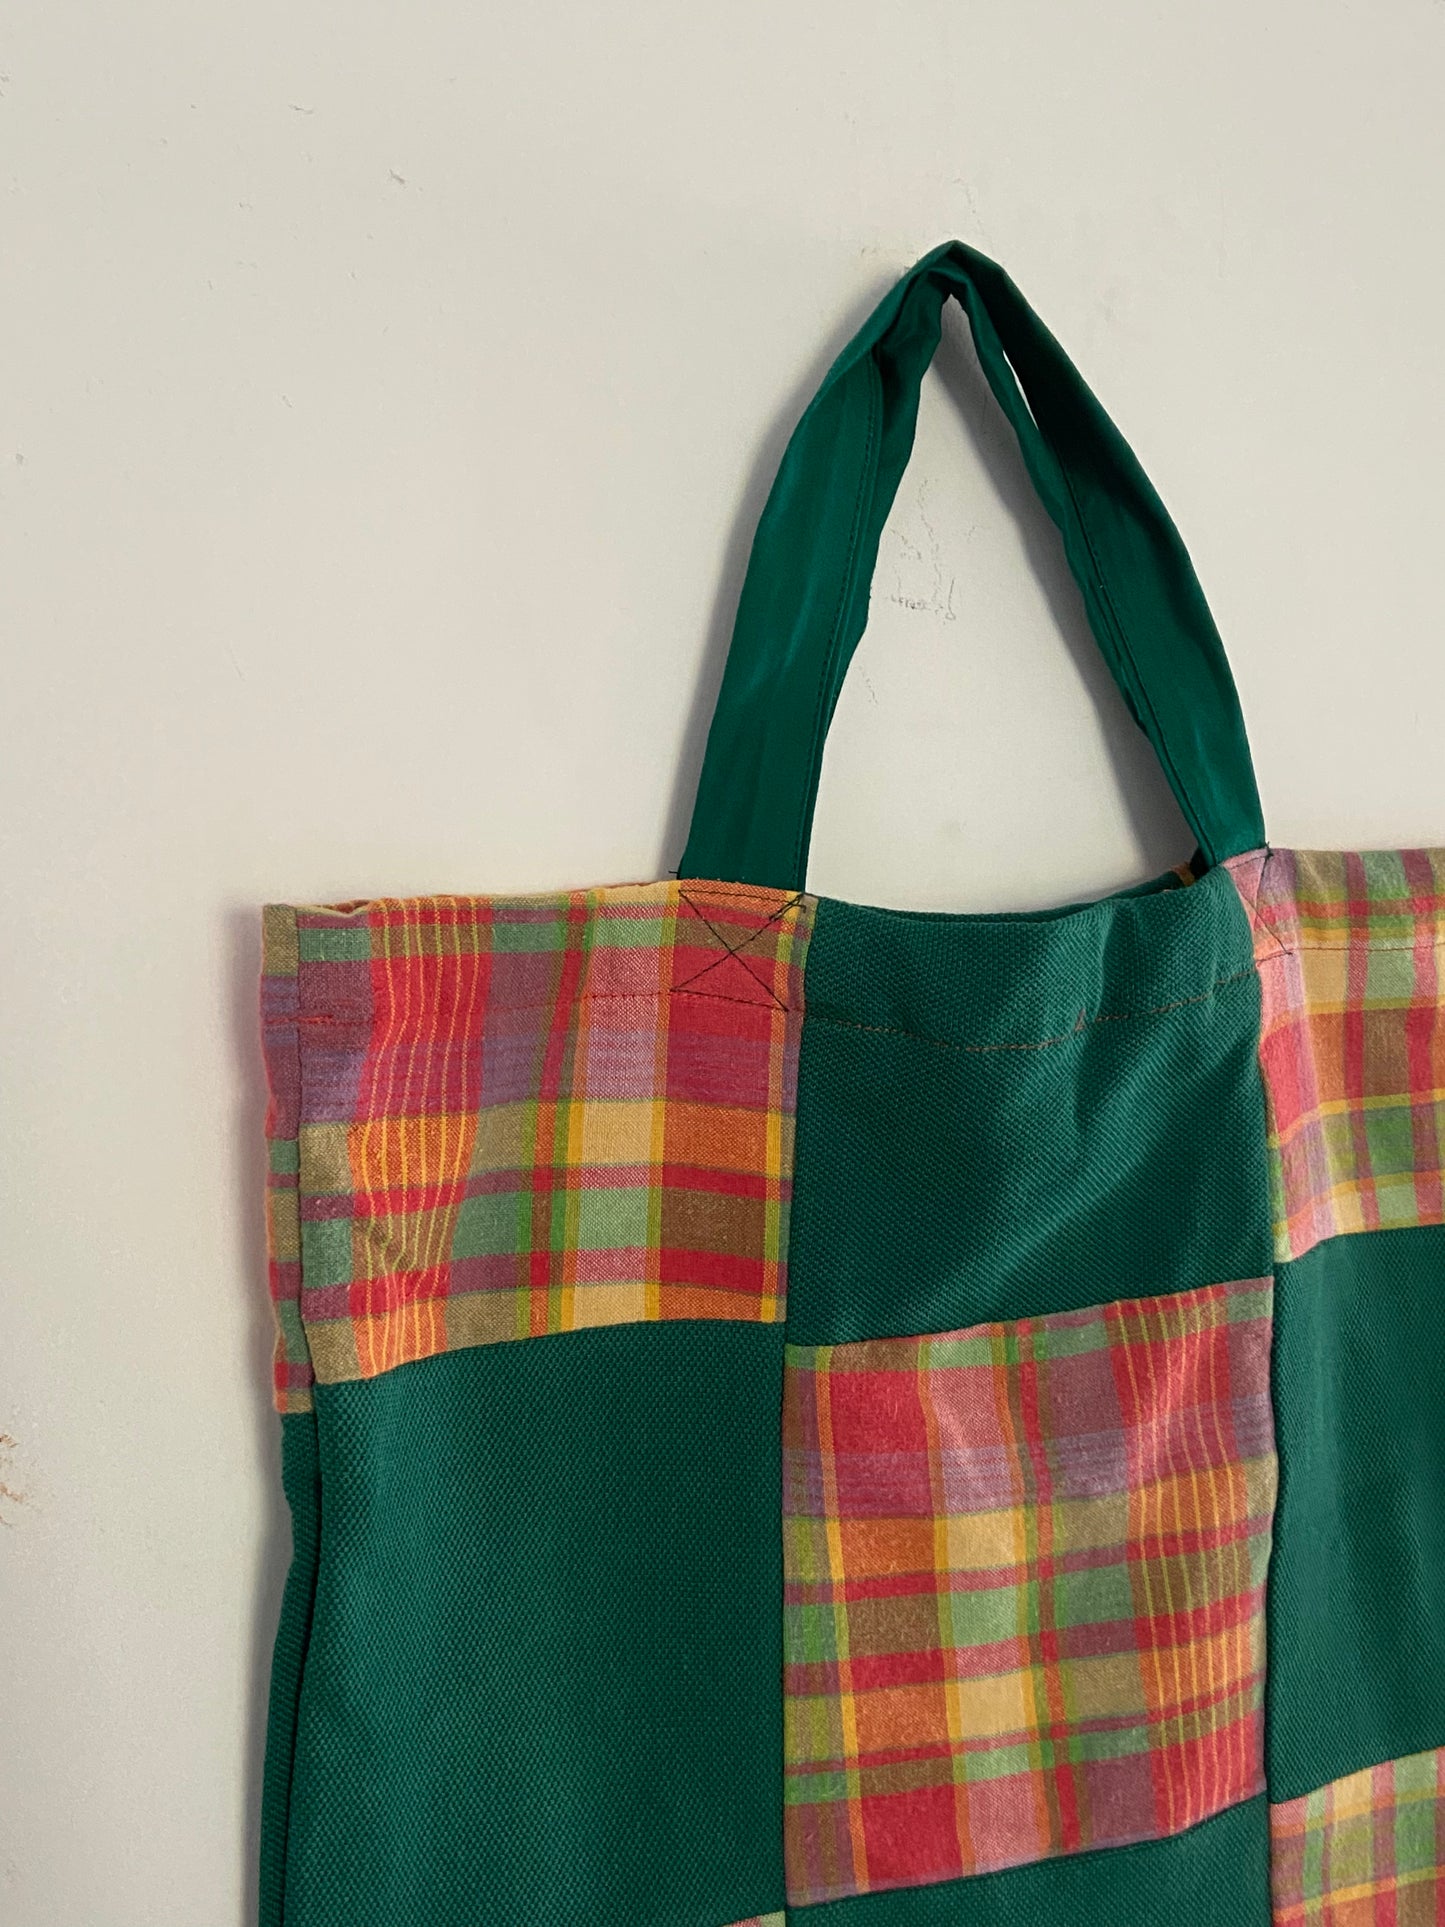 mini-tote-bag-upcycled-and-handmade-green-front-close-up